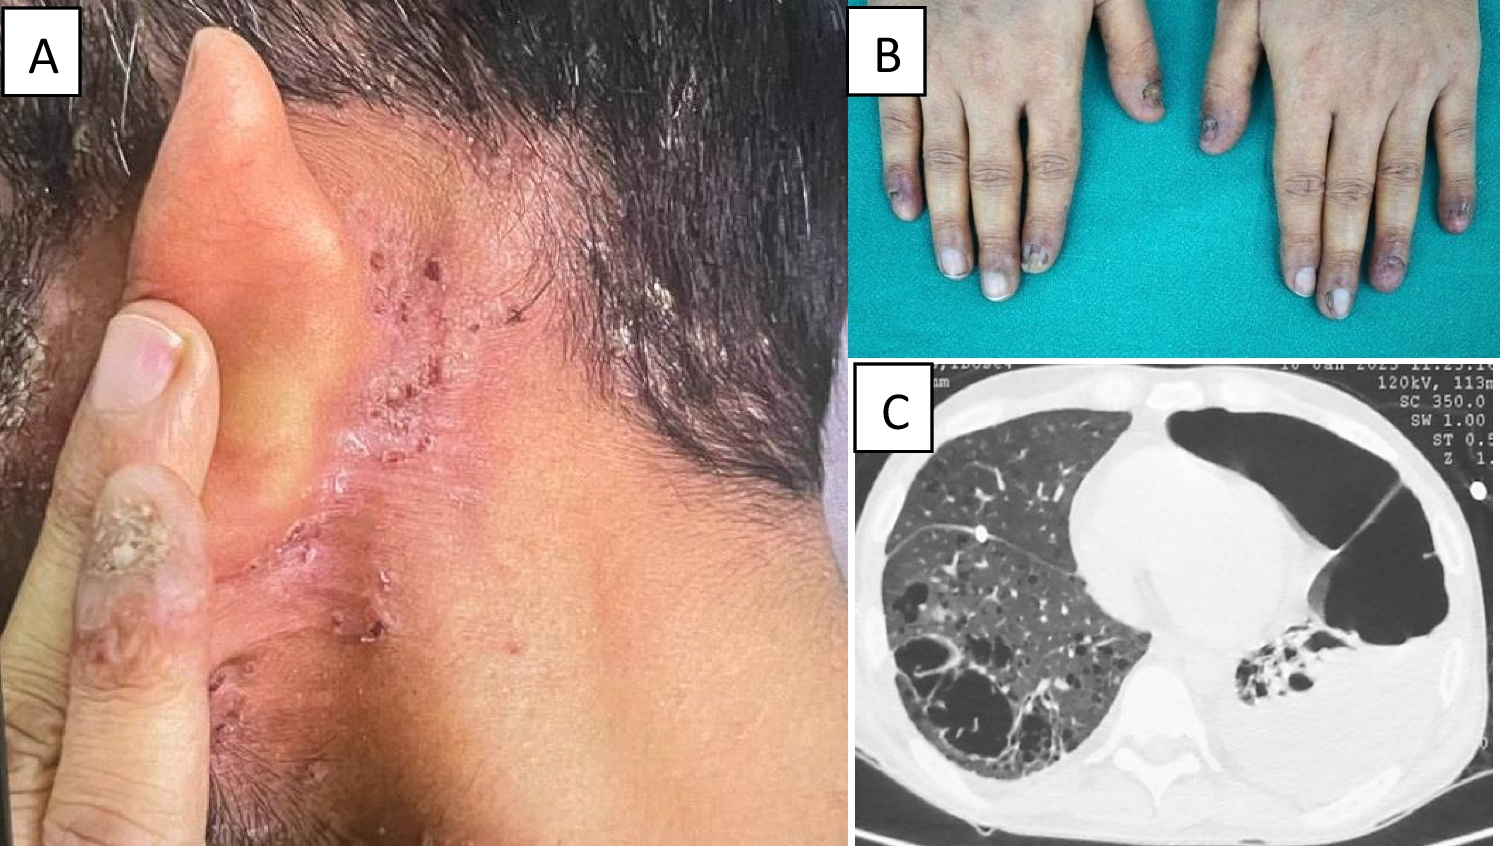 Adult Langerhans Cell Histiocytosis Presenting With Skin Lesions, Sclerosing Cholangitis and Pneumothorax